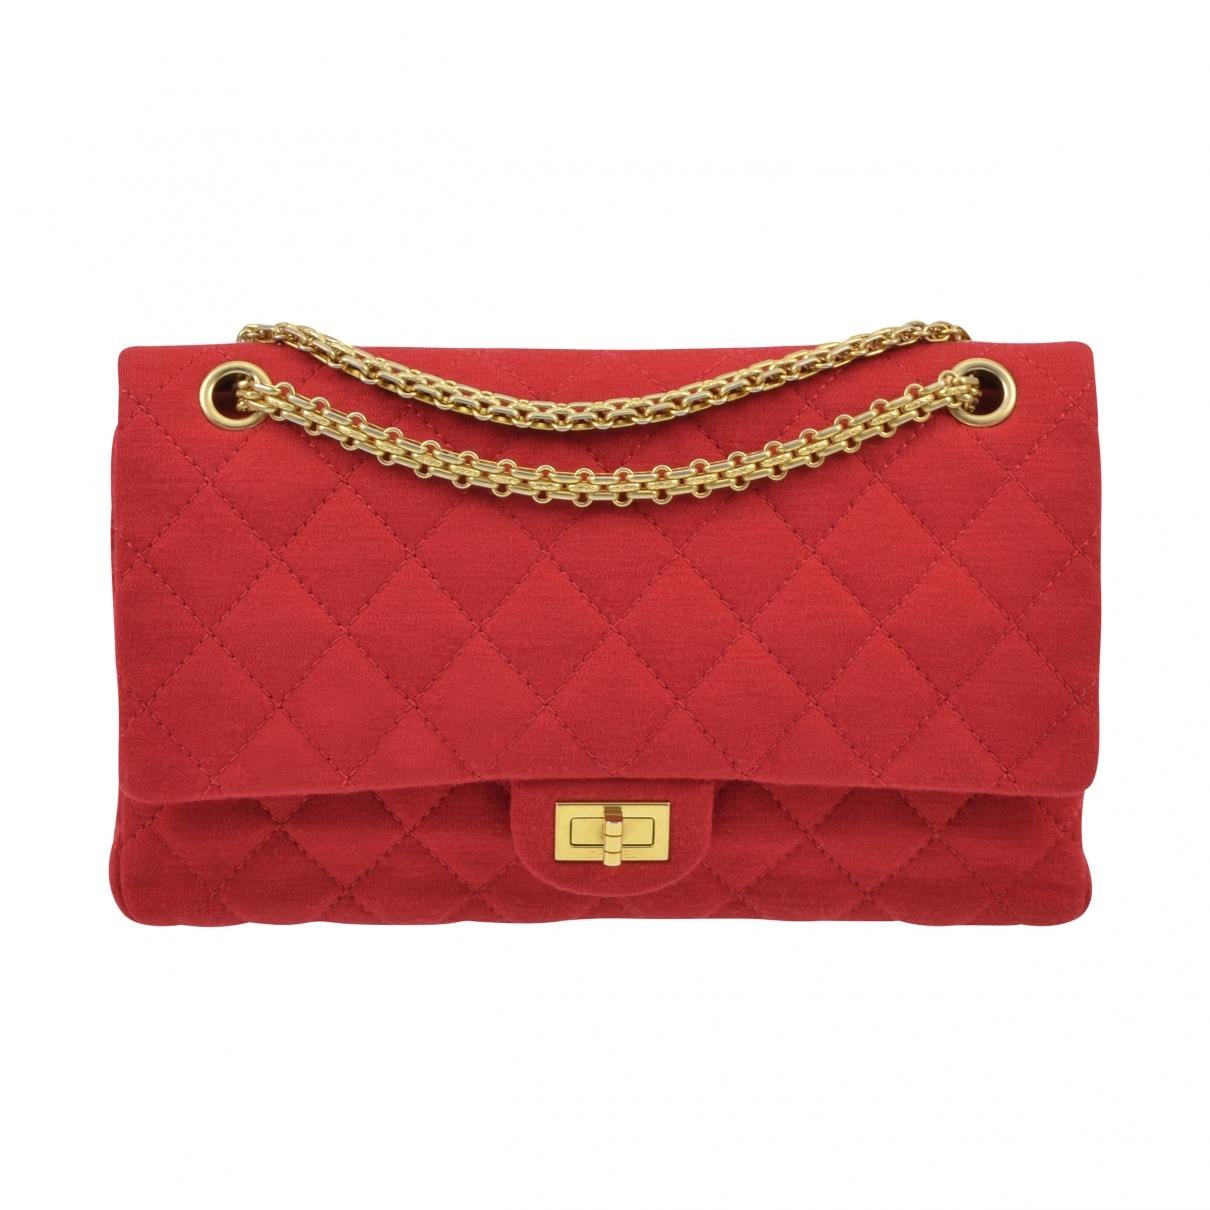 Chanel 2.55 Red Cloth Handbag in Red - Lyst